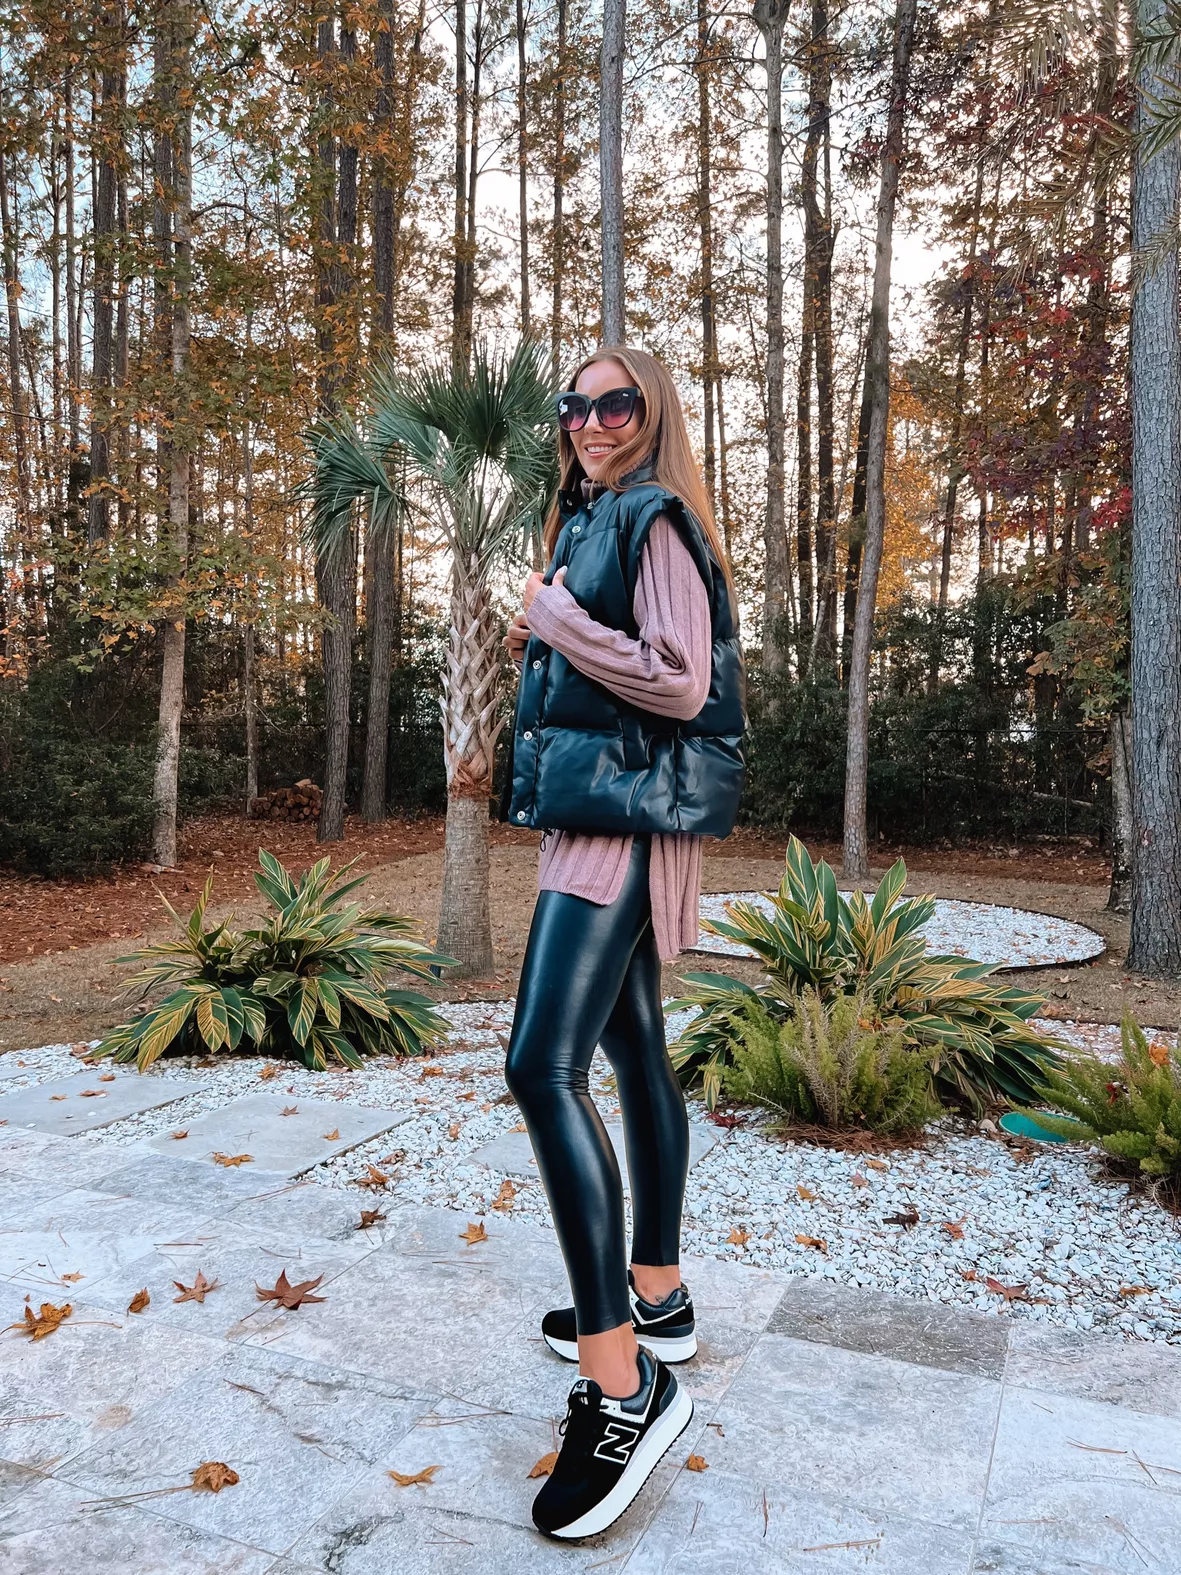 commando faux leather leggings review - how to wear faux leather leggings  outfit 10 - Northwest Blonde